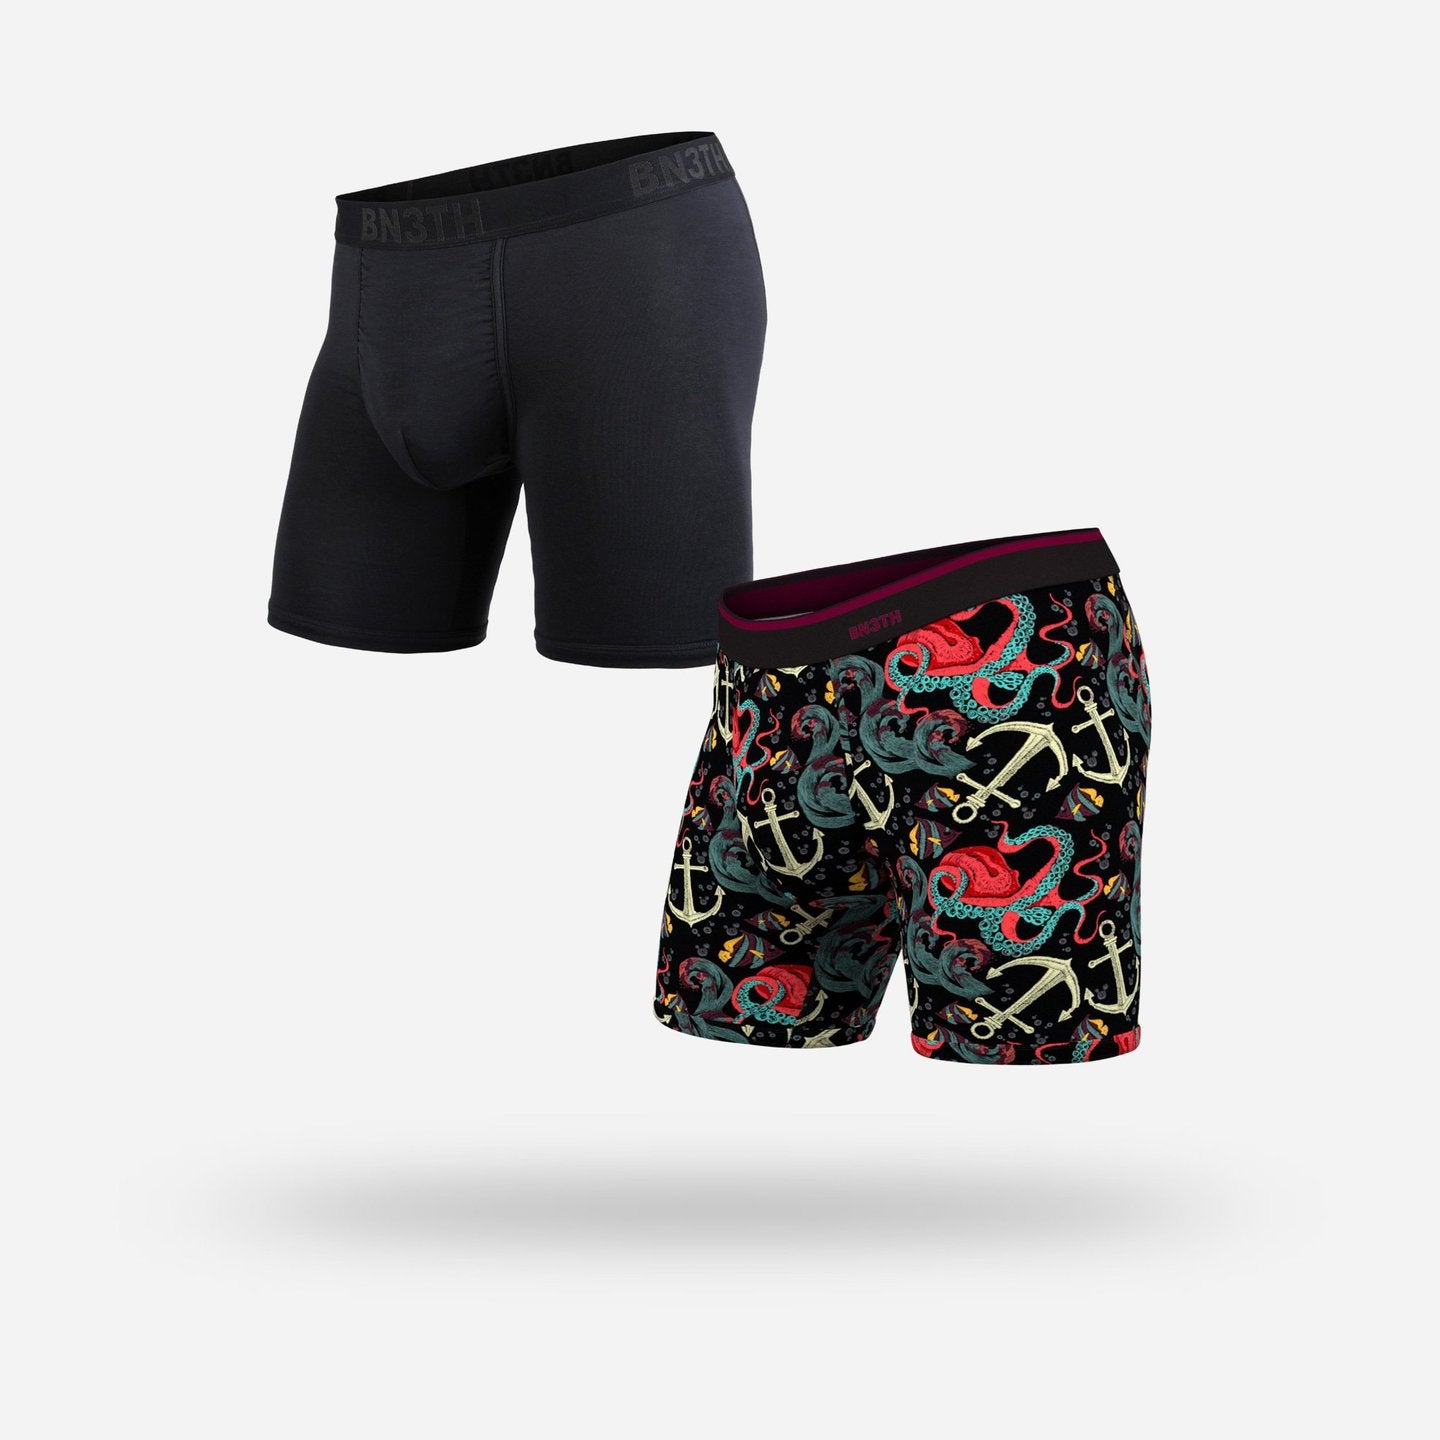 BN3TH Classic 6.5" Boxer Brief 2 Pack - Black/Under the Sea